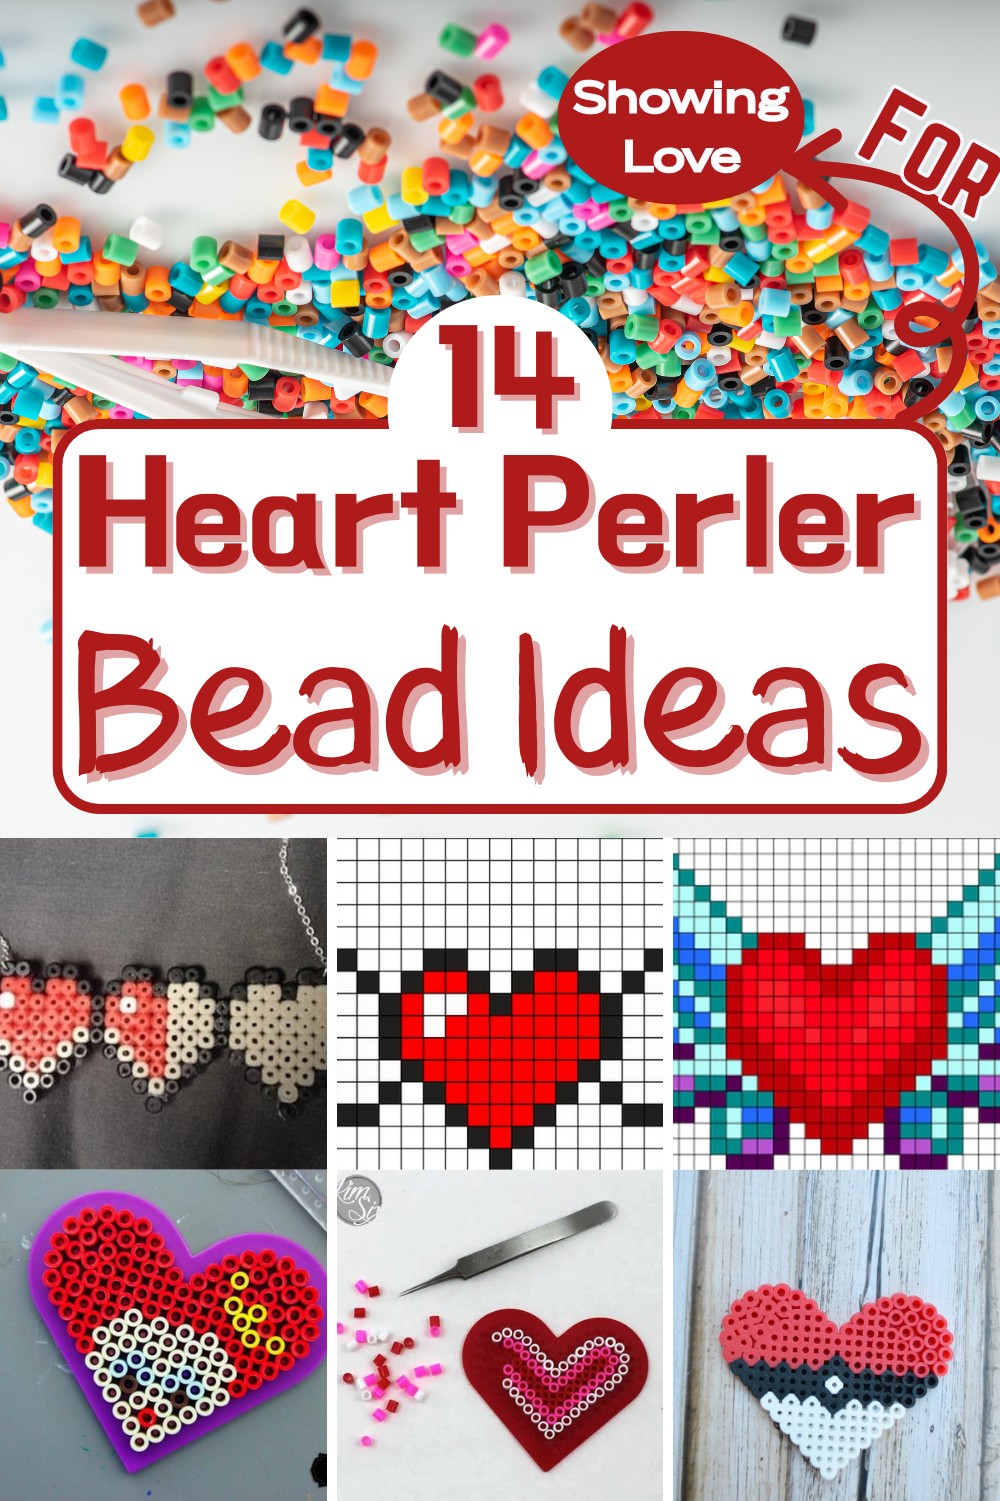 14 Heart Perler Bead Patterns For Showing Love